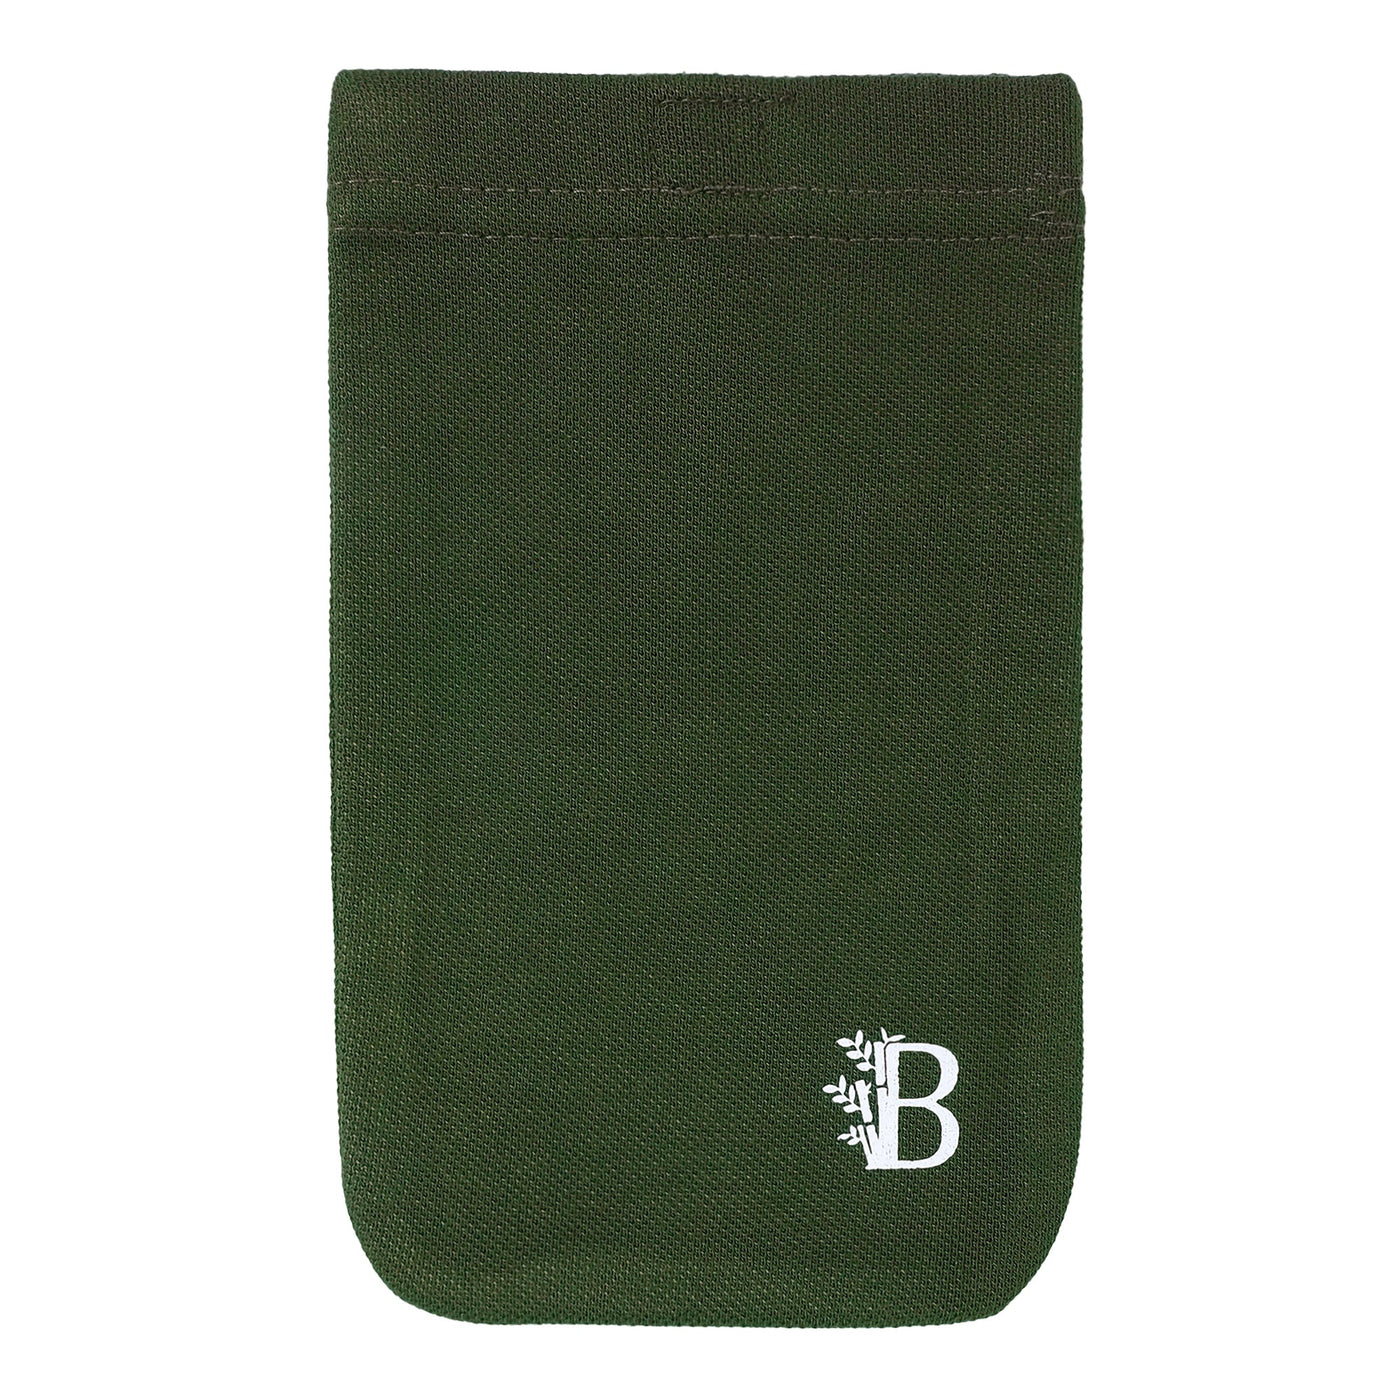 Bamboo fabric anti-bacterial olive mobile cover